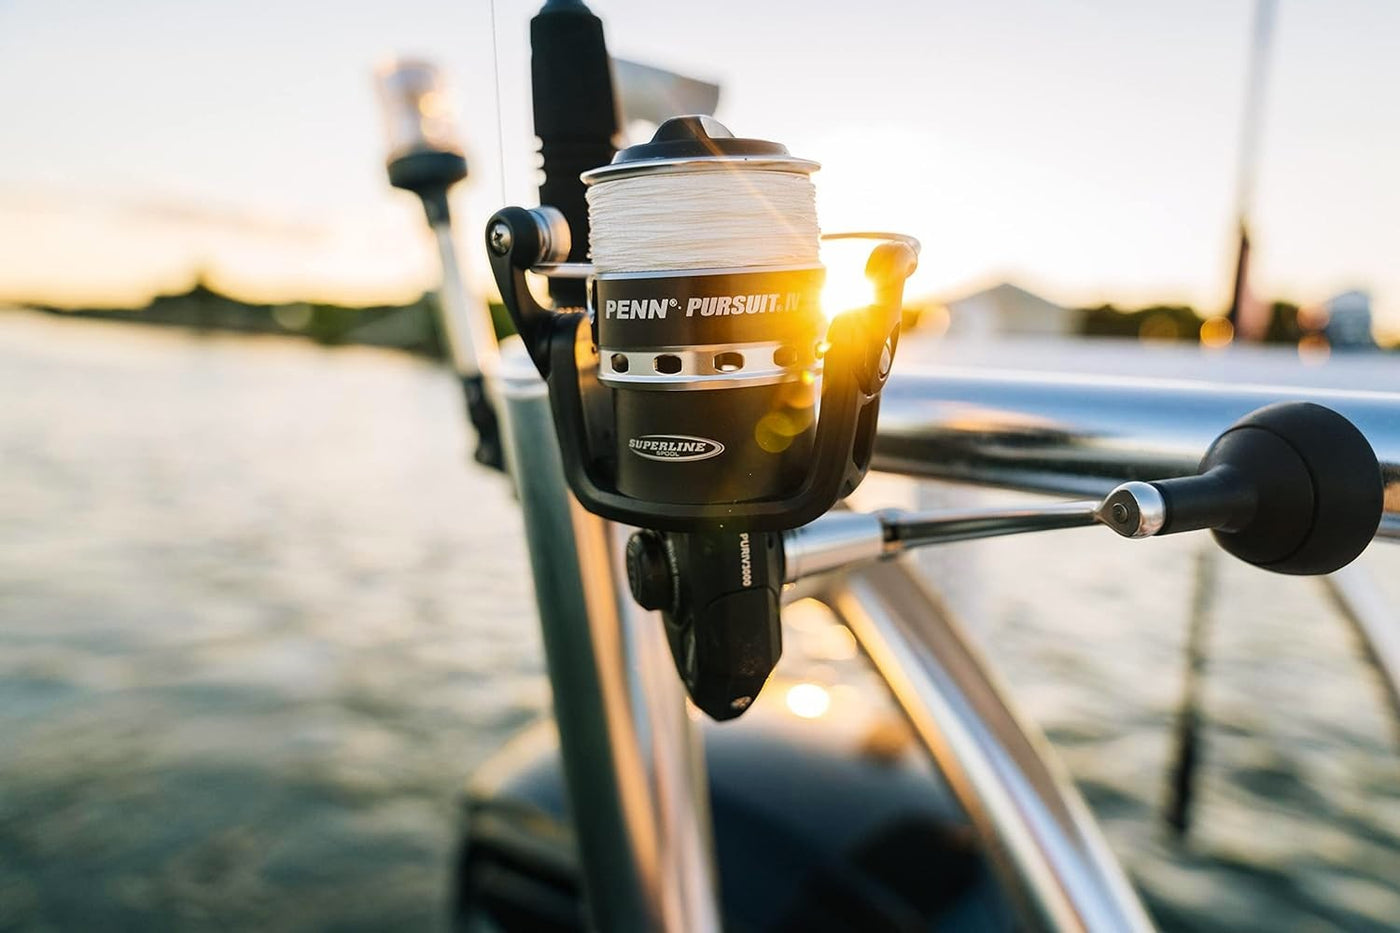 Angled view of PENN Pursuit IV spinning reel attached to the fishing rod, highlighting its durability